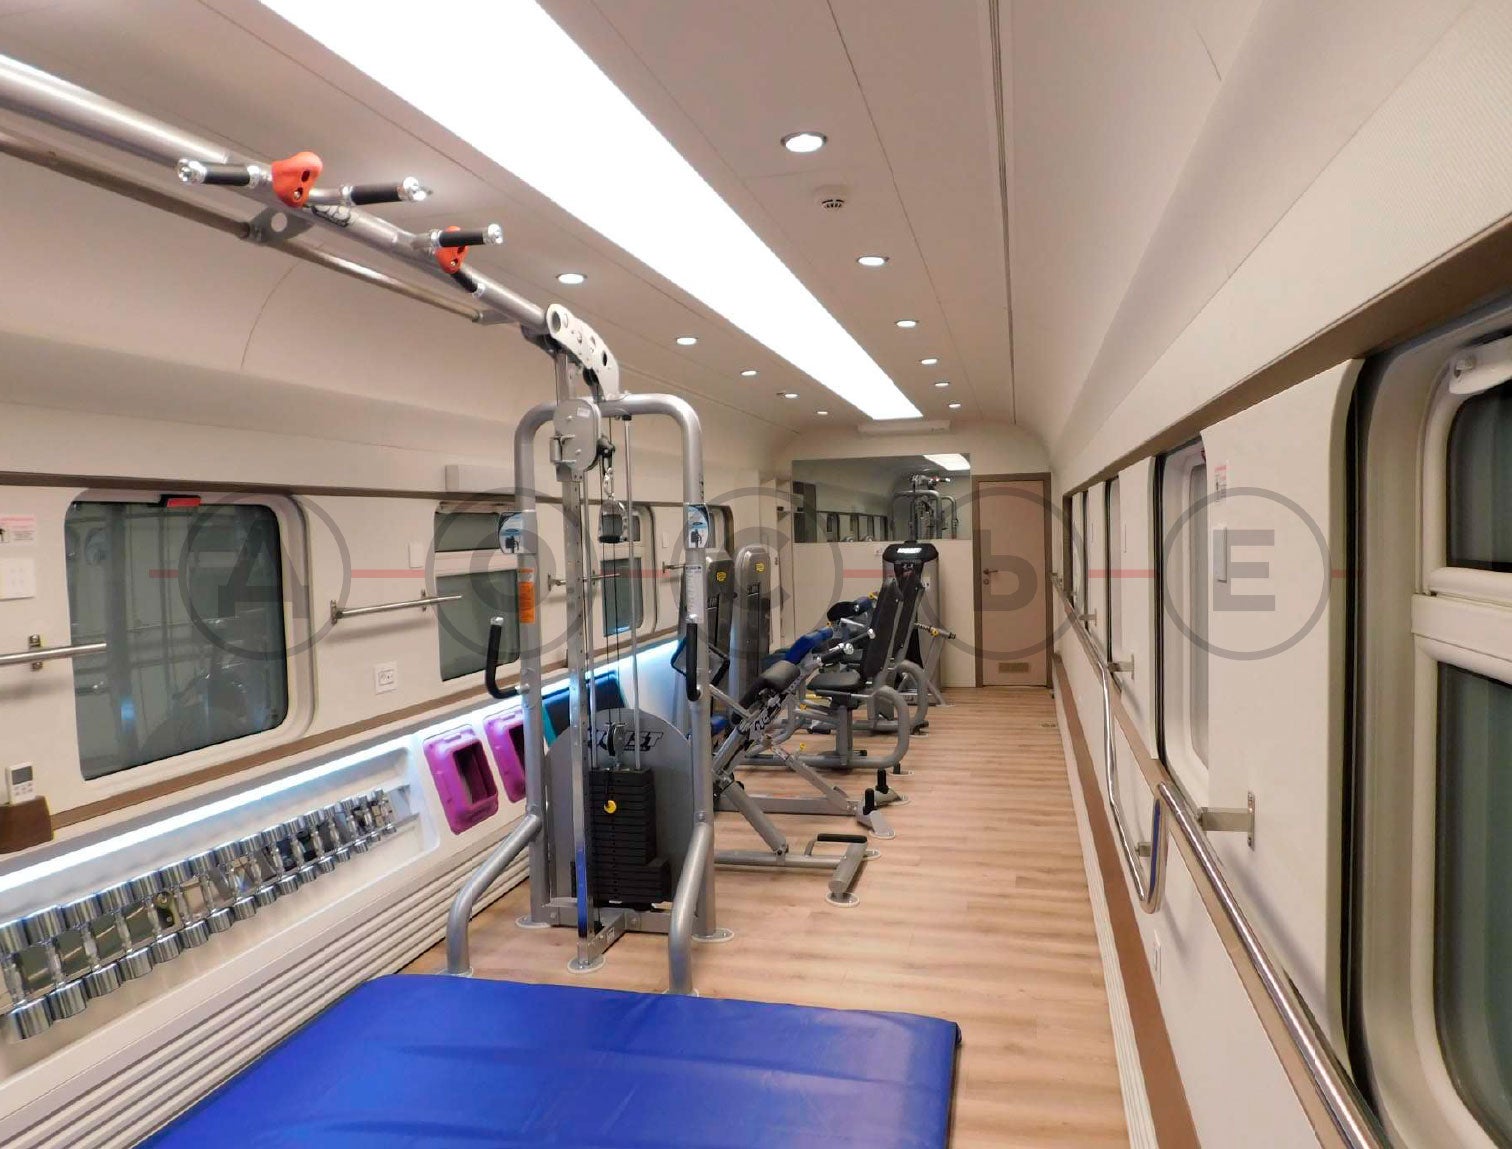 Putin’s armoured train features a state-of-the-art gym